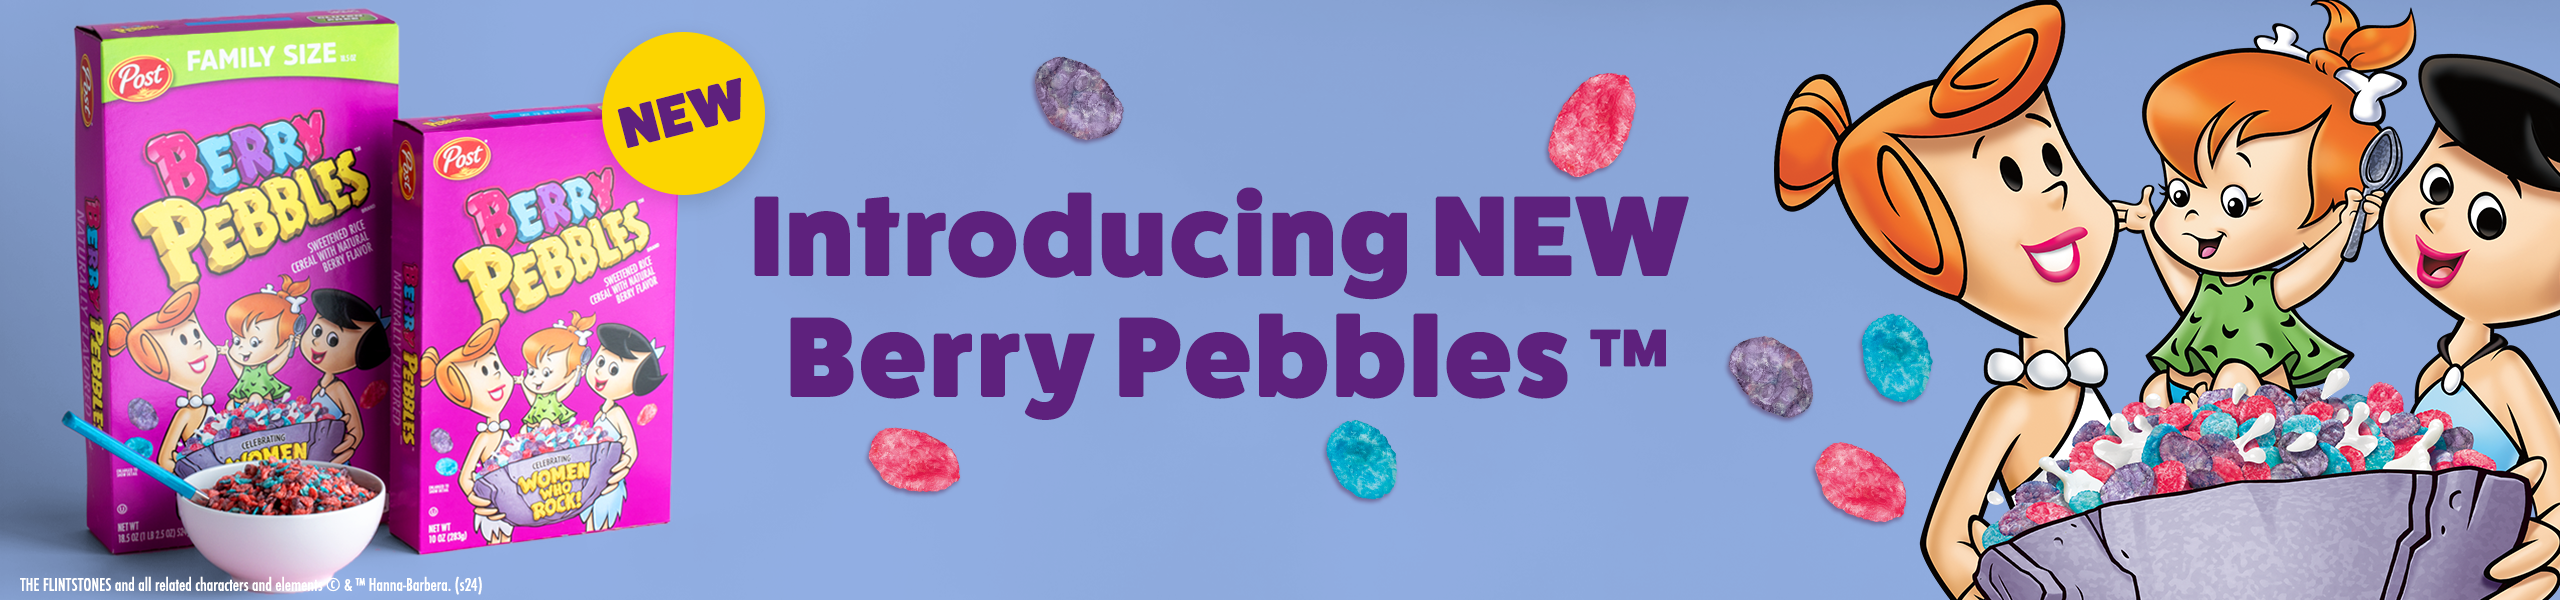 New Berry PEBBLES cereal